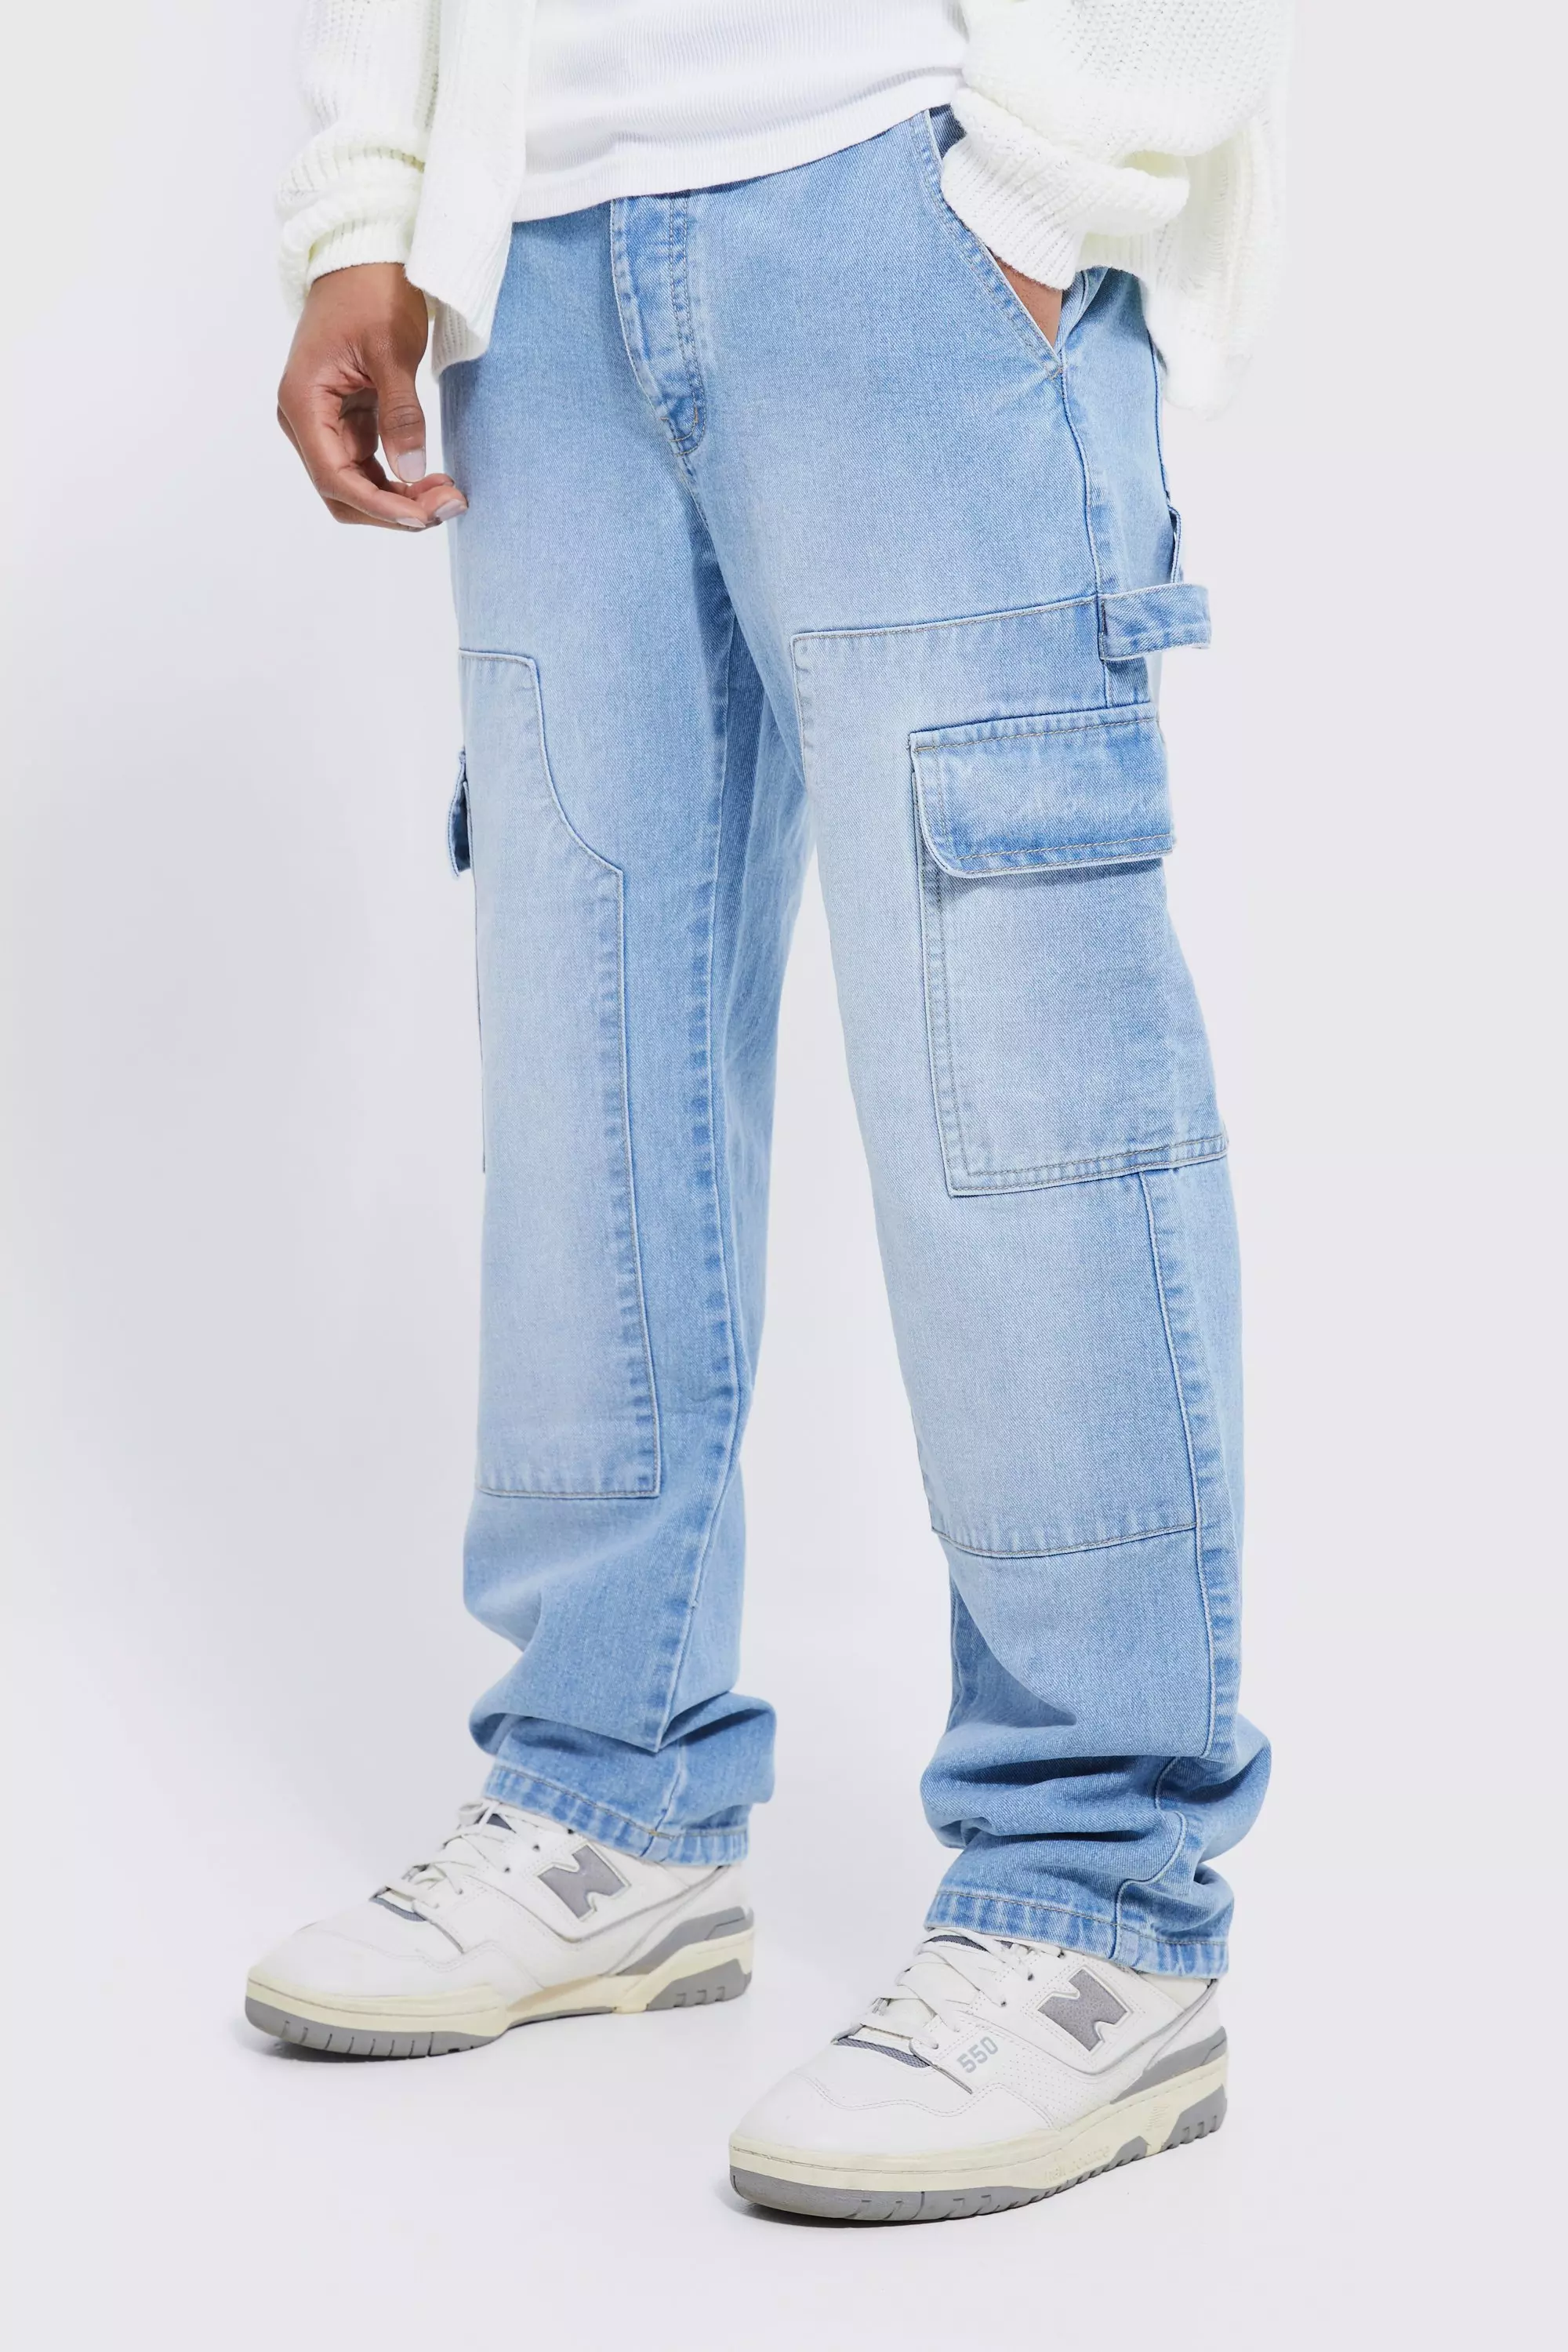 Men's Relaxed-Fit Jeans - Shop Jeans Online - Weekday